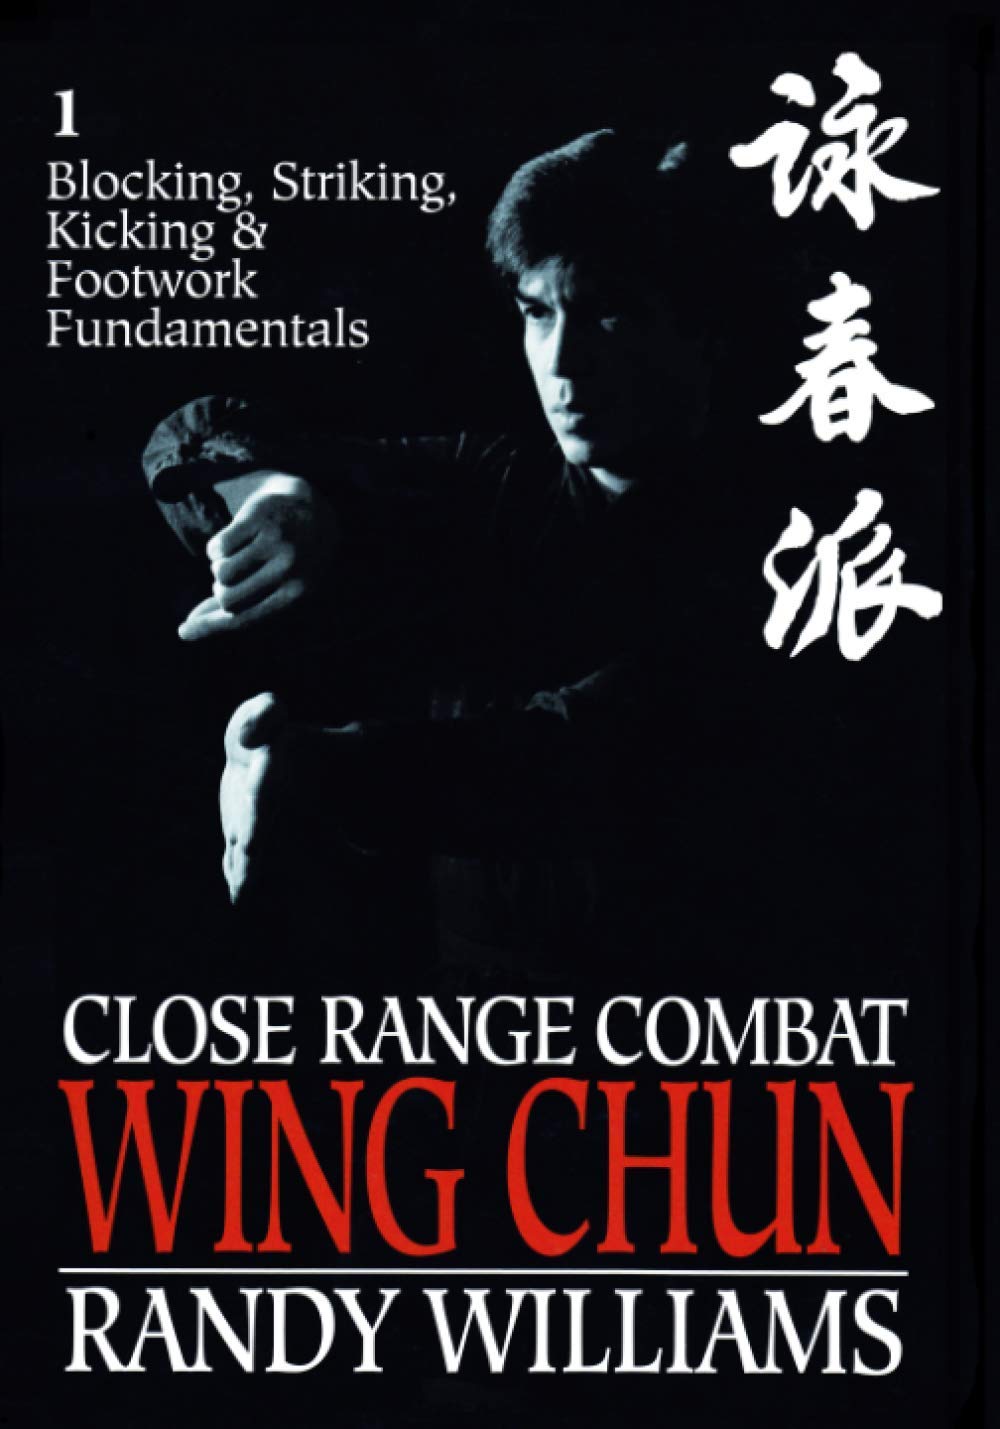 Close Range Combat Wing Chun Book 1 by Randy Williams (Preowned) - Budovideos Inc